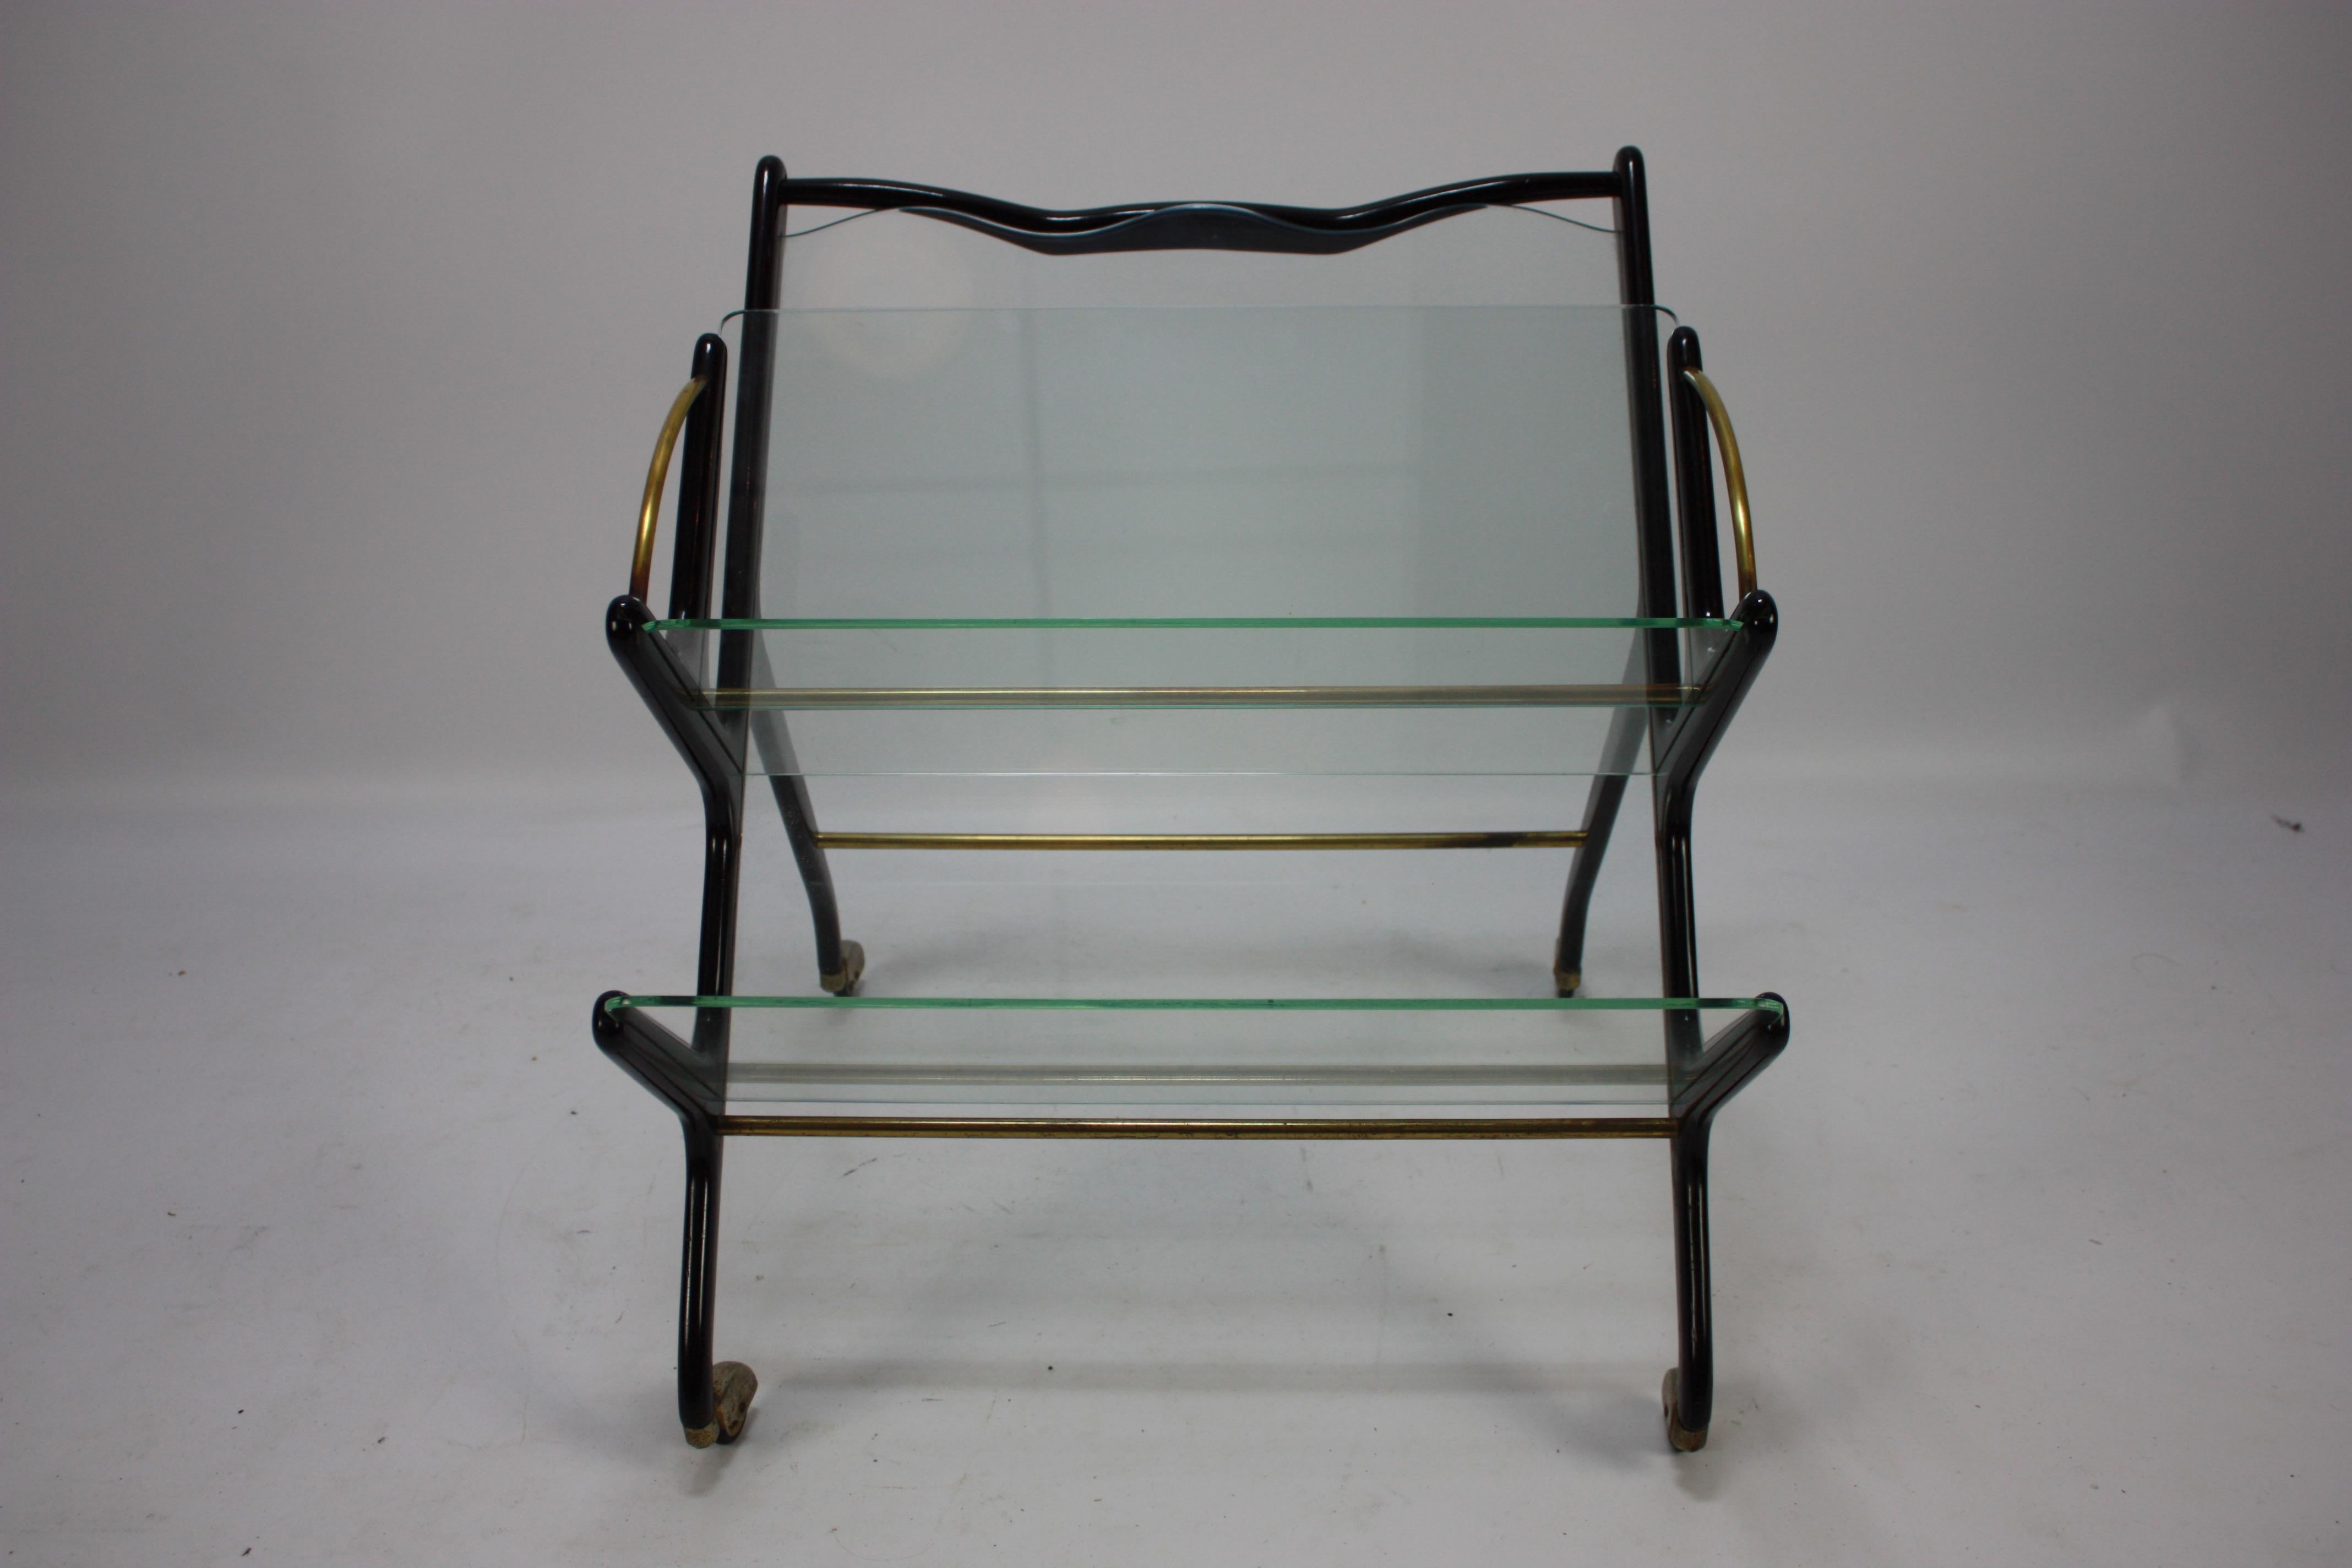 Wonderful Ico Parisi piece from the 1950s. Made of black lacquered mahogany with original brass wheels. Very well shaped and in very good condition.
Can be used for magazines, papers or just as a piece of art.